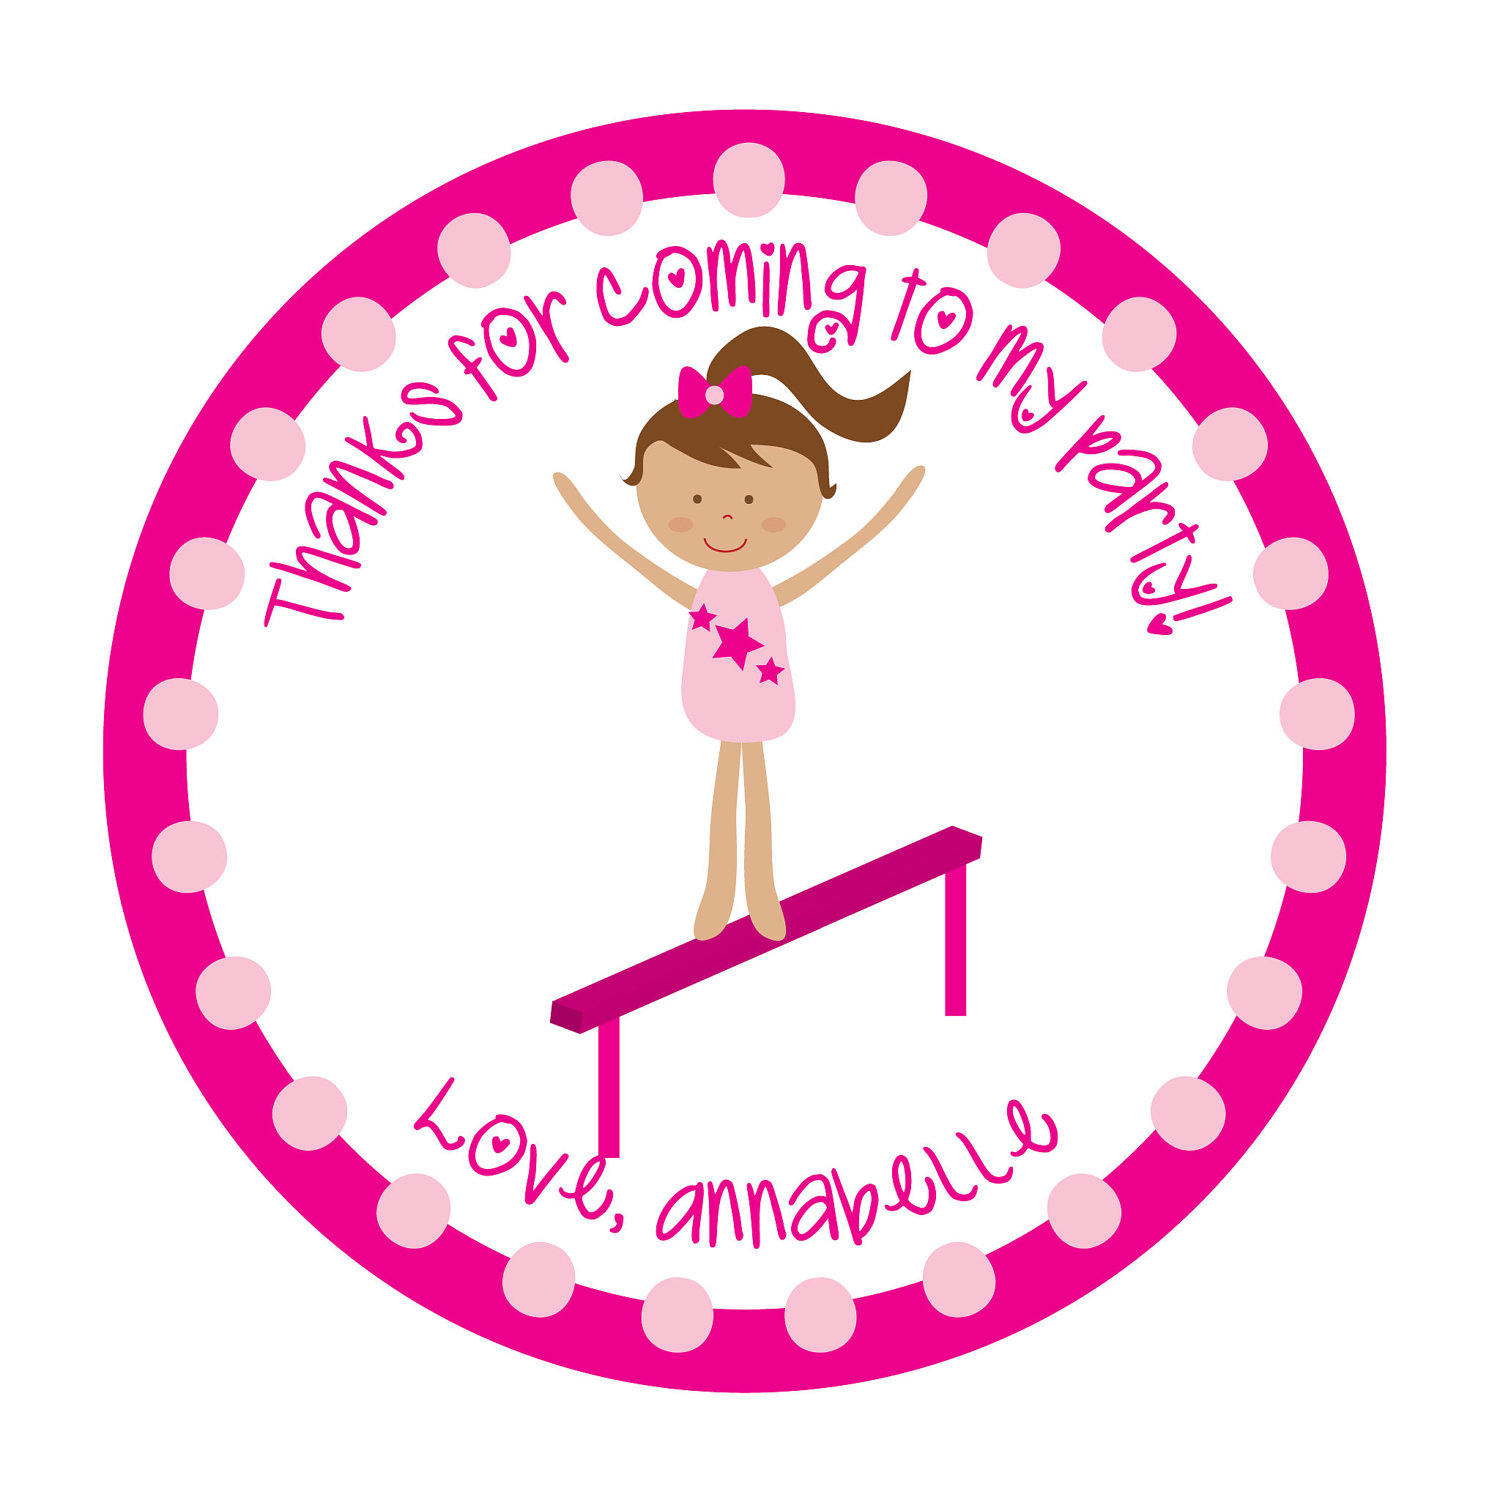 Tumbling gymnastics birthday party clip art pictures to pin on